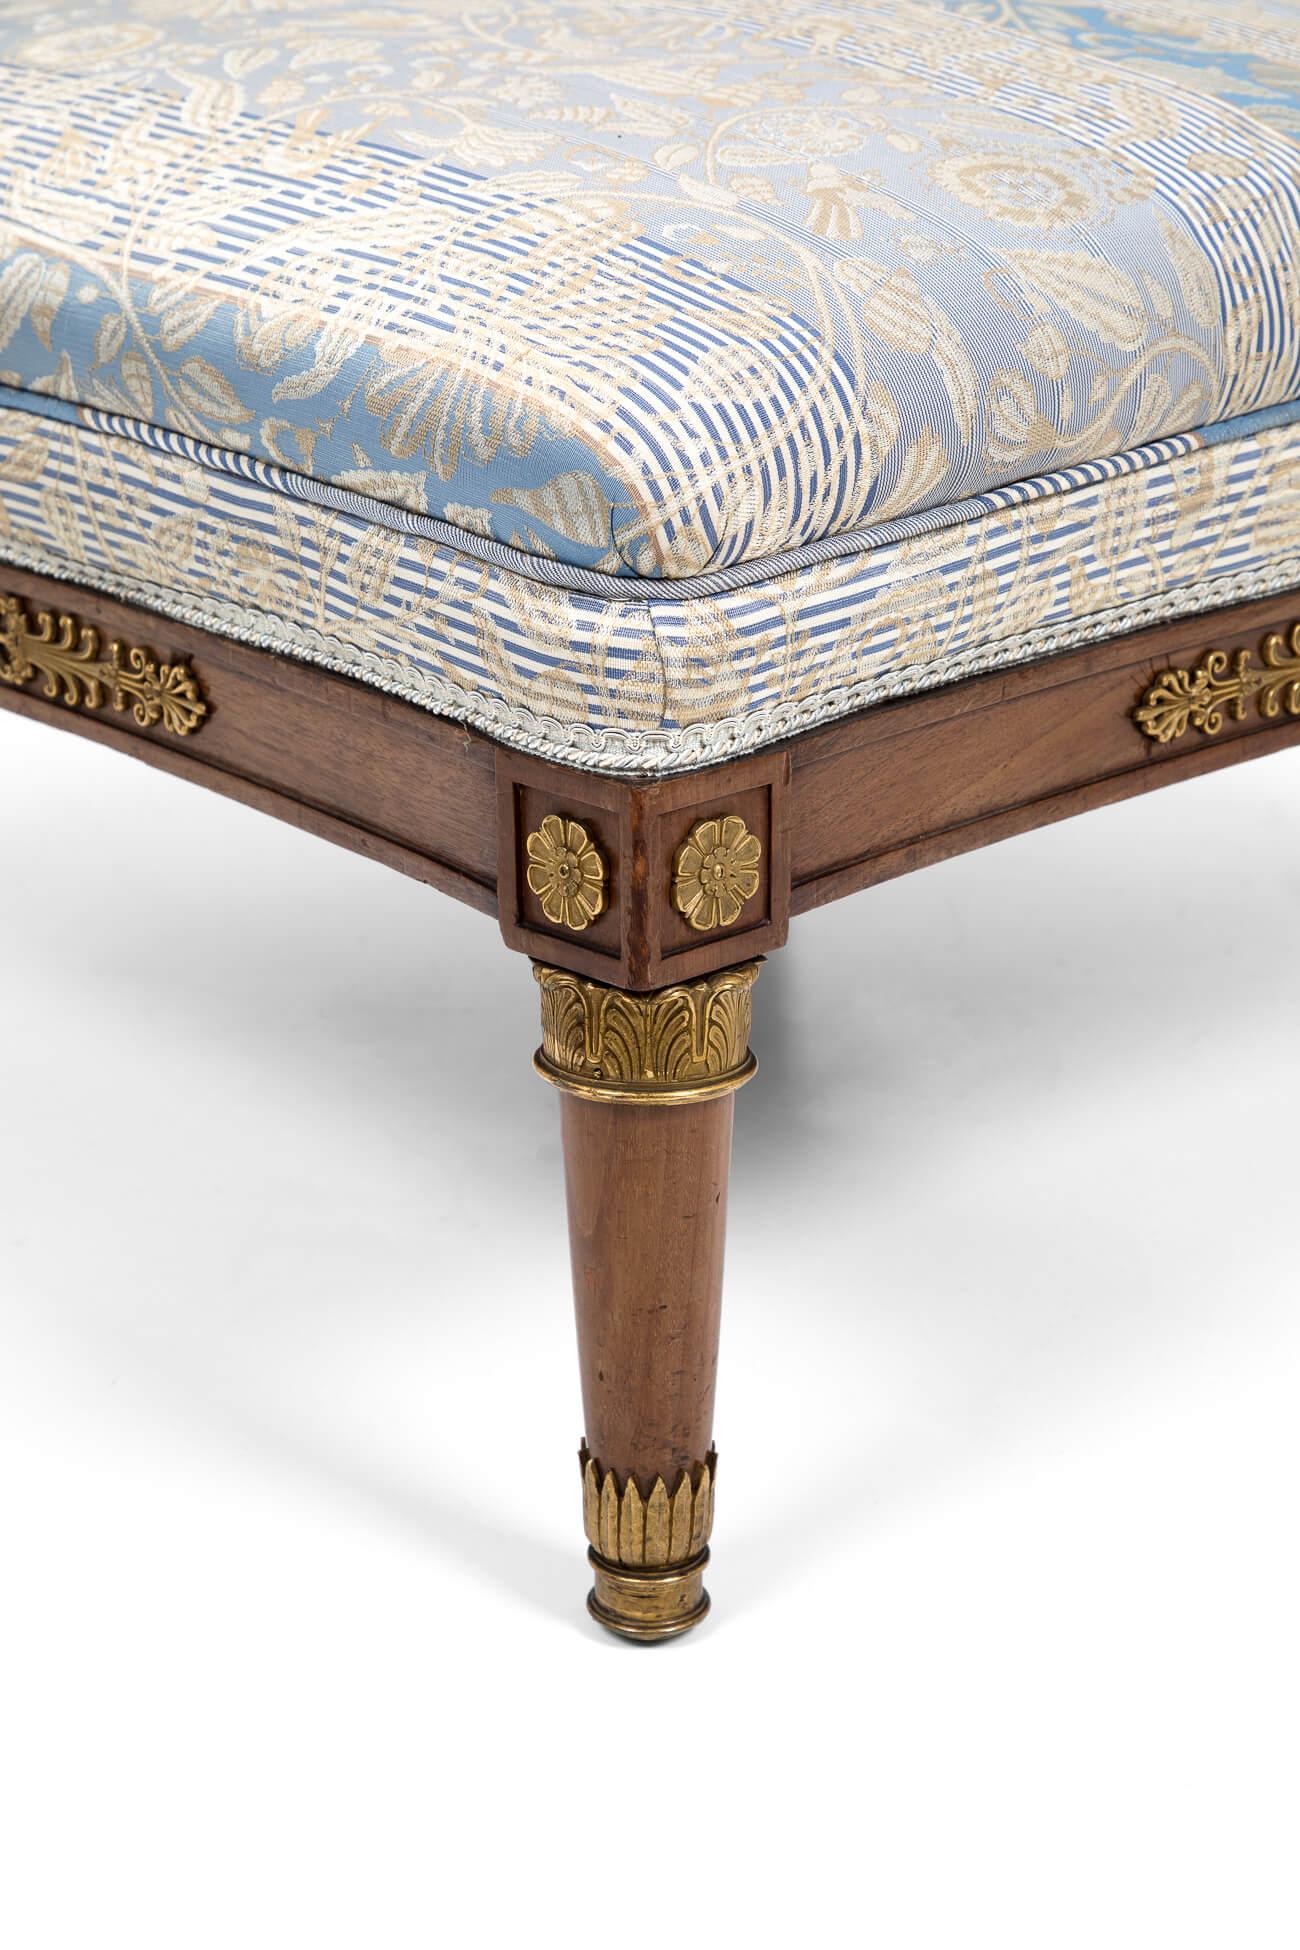 19th Century French Mahogany Footstool, circa 1850 For Sale 4